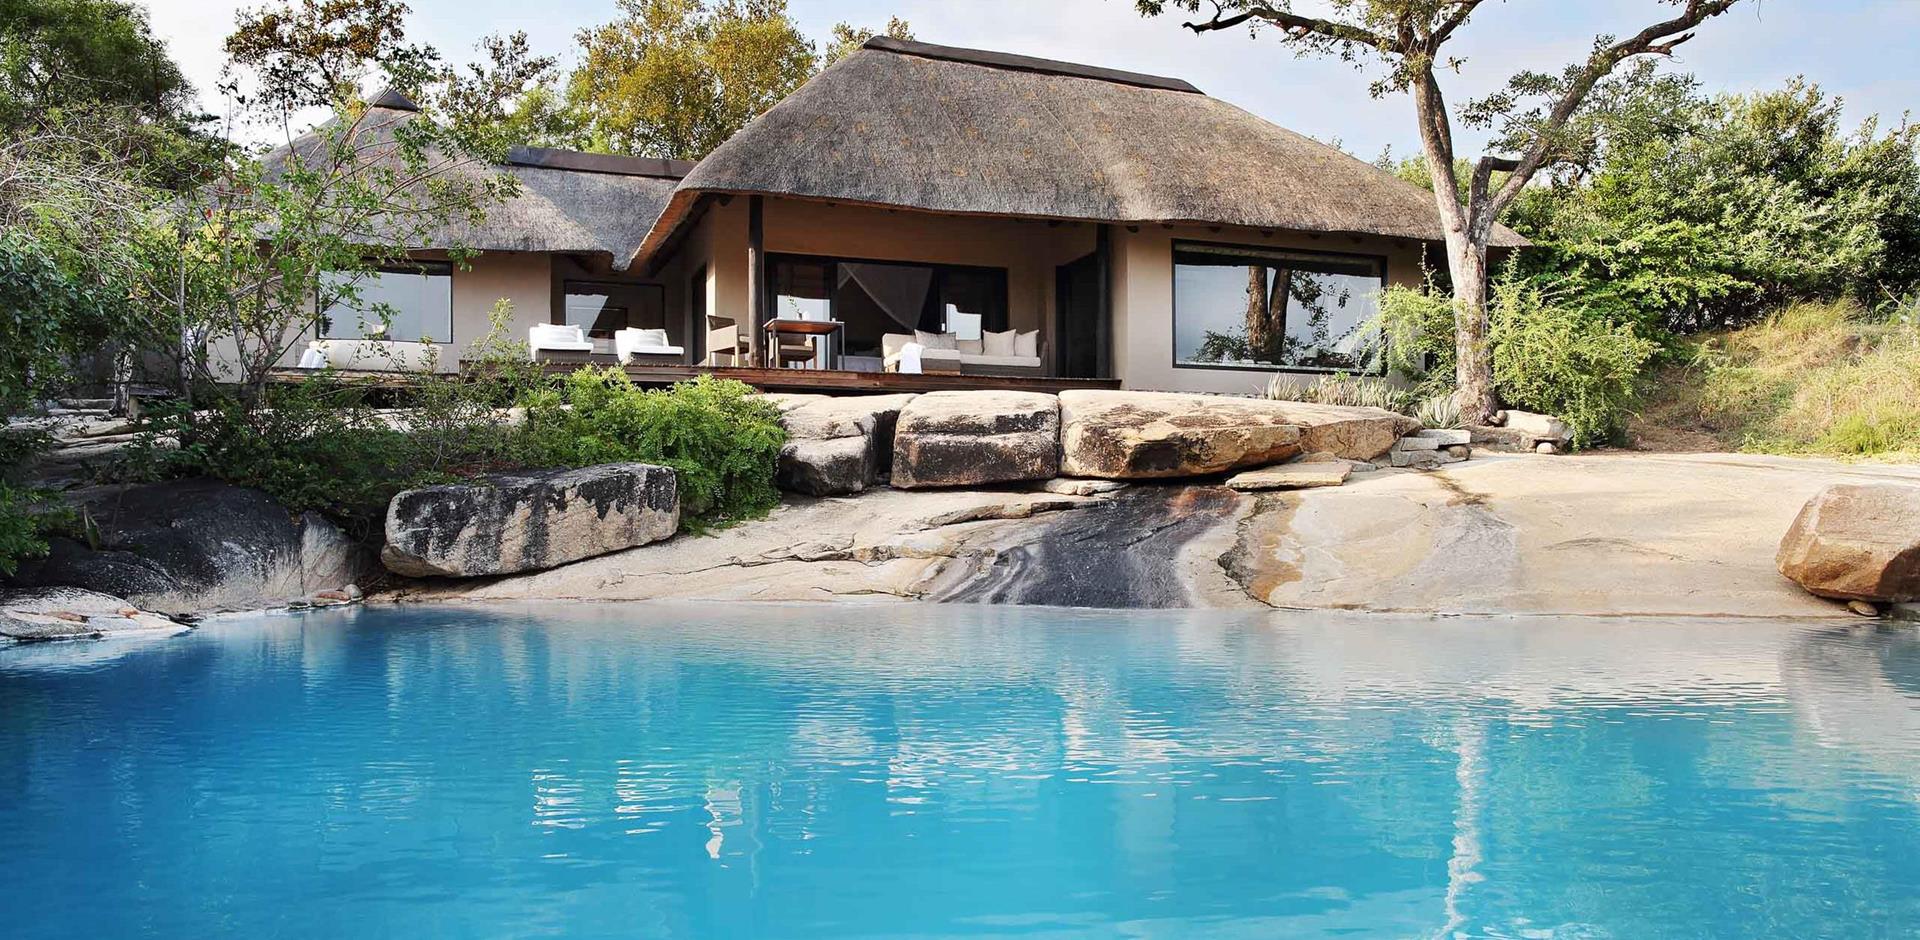 Pool and exterior, Londolozi Private Granite Suites, South Africa, A&K